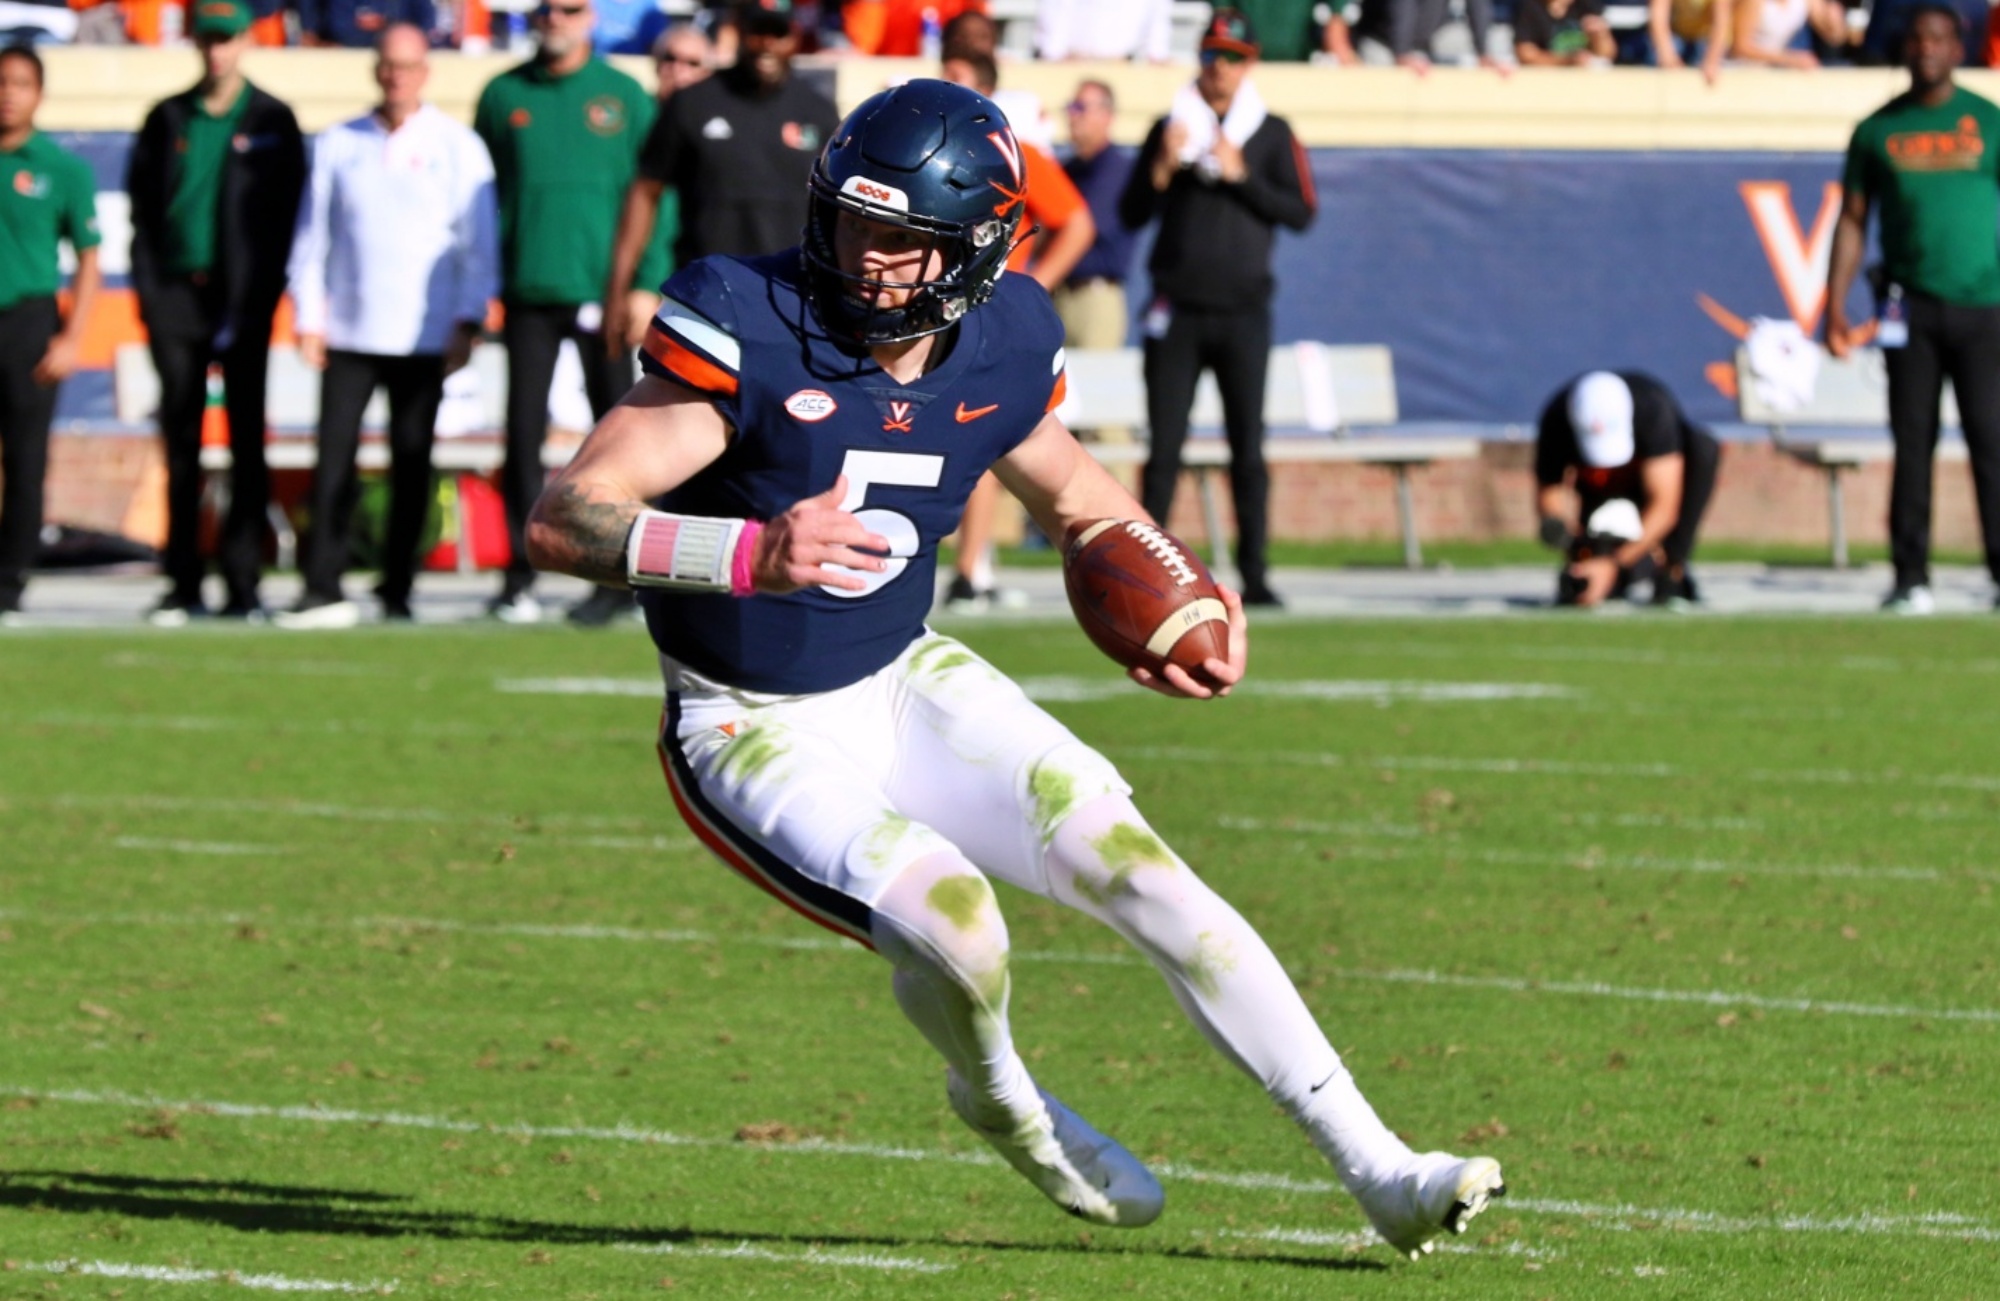 Virginia Football Game Preview Can UVA Upset UNC?